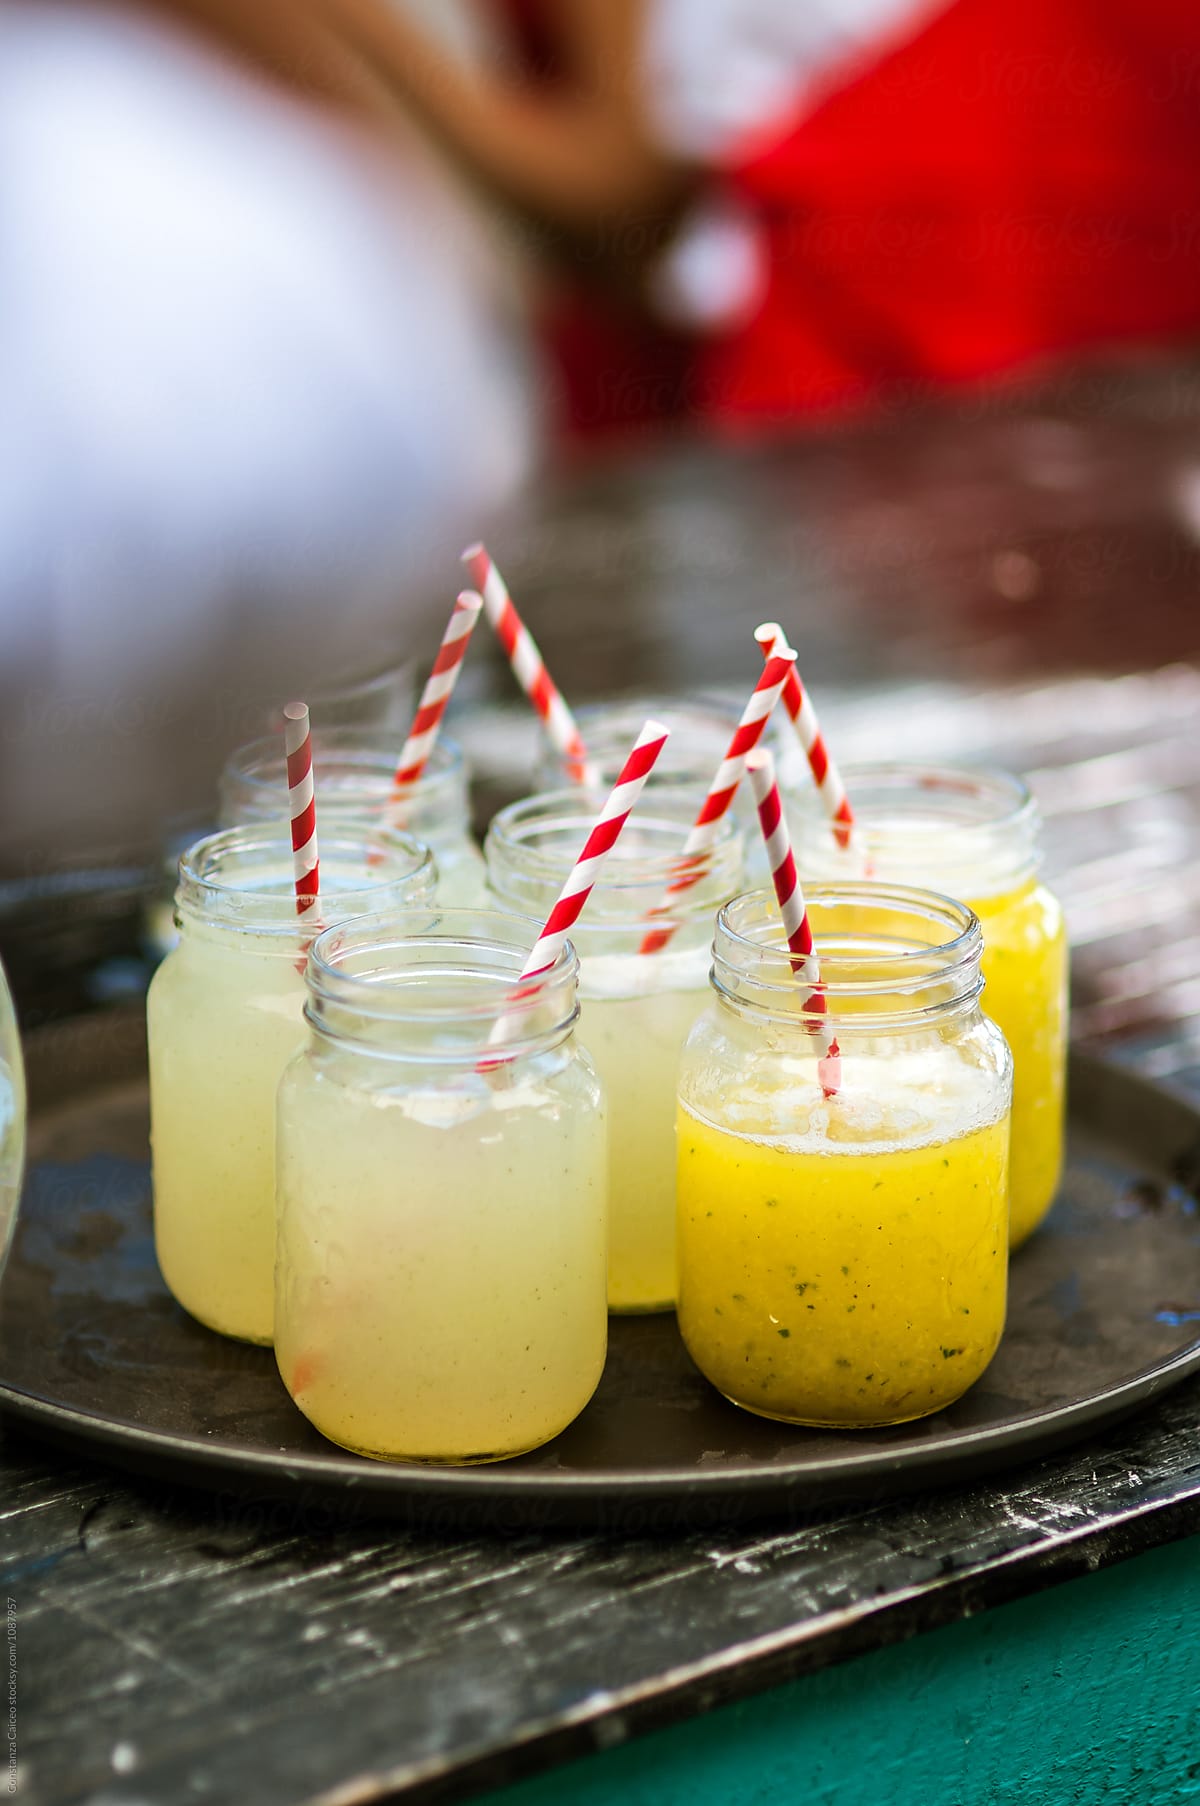 Lemonade jars on a tray with red and white stripped straws